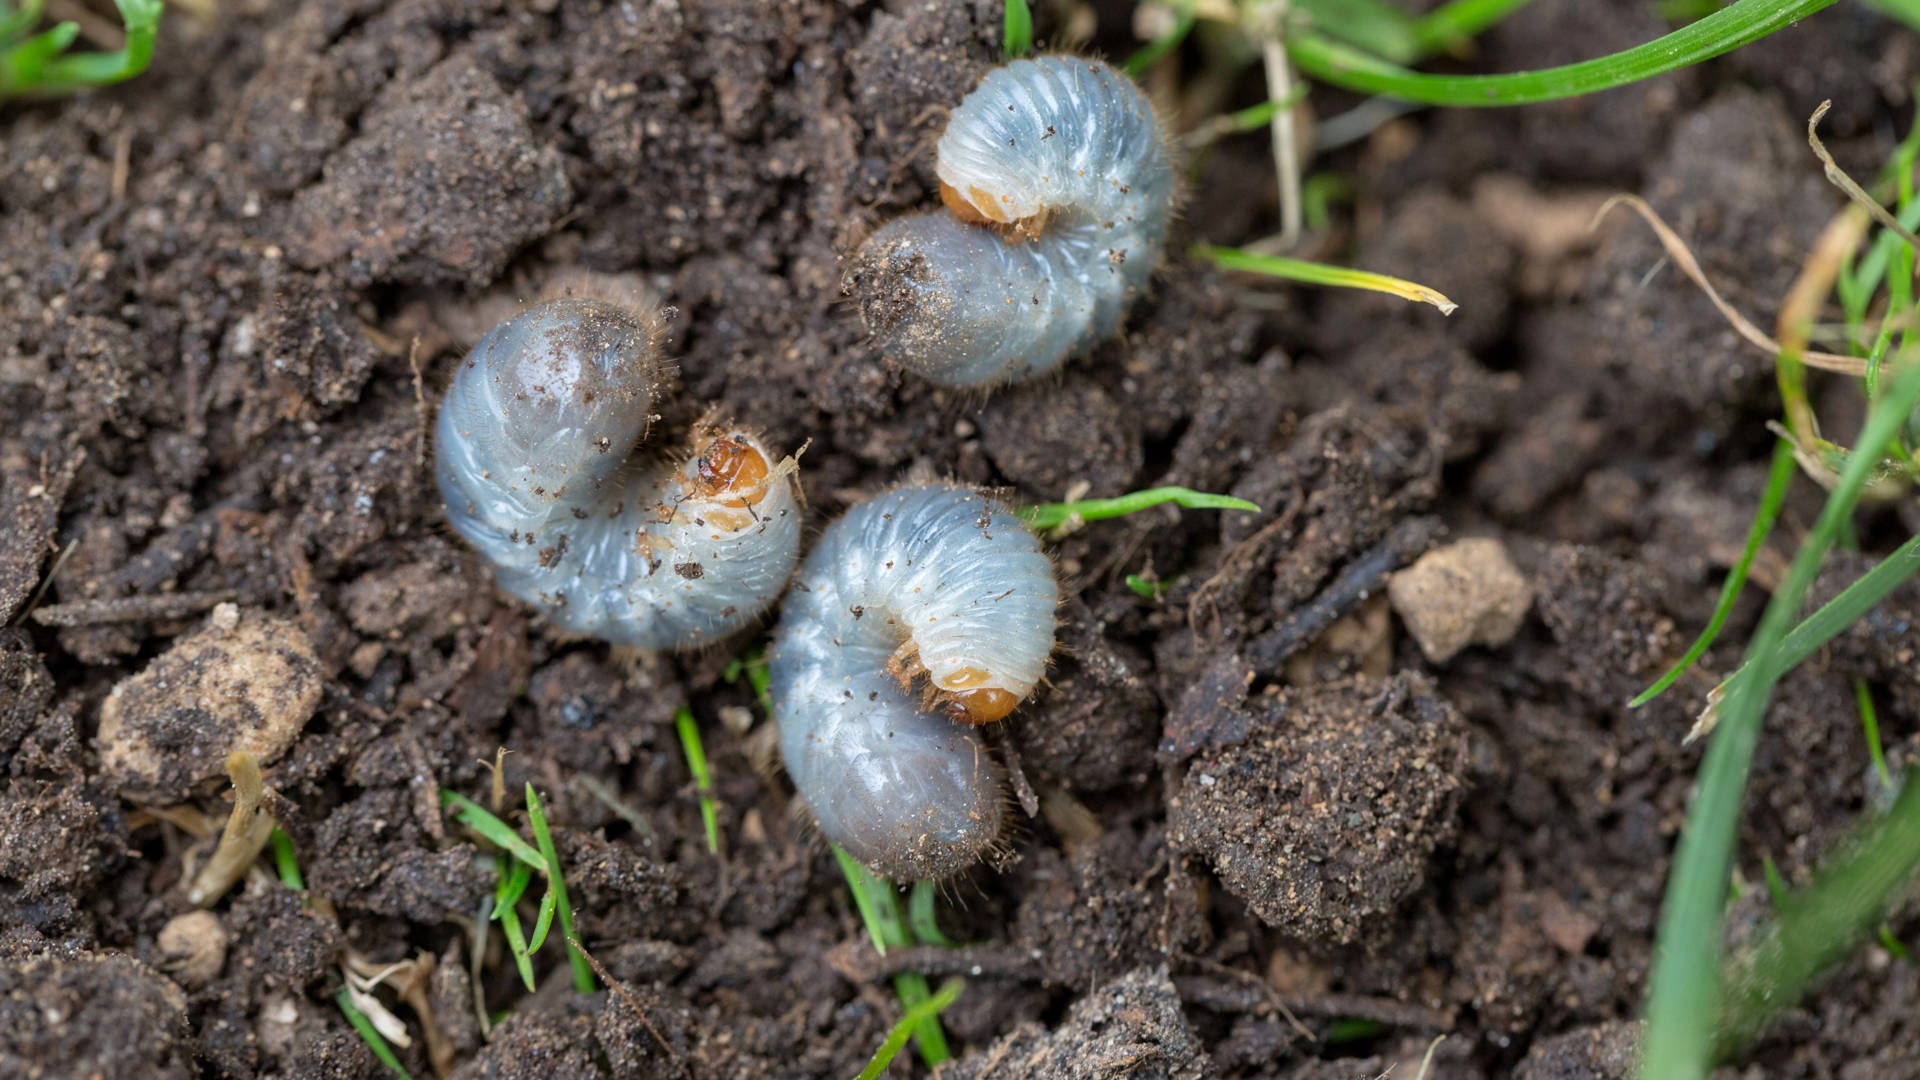 Grubs in the dirt together causing issues near Overland Park, KS.